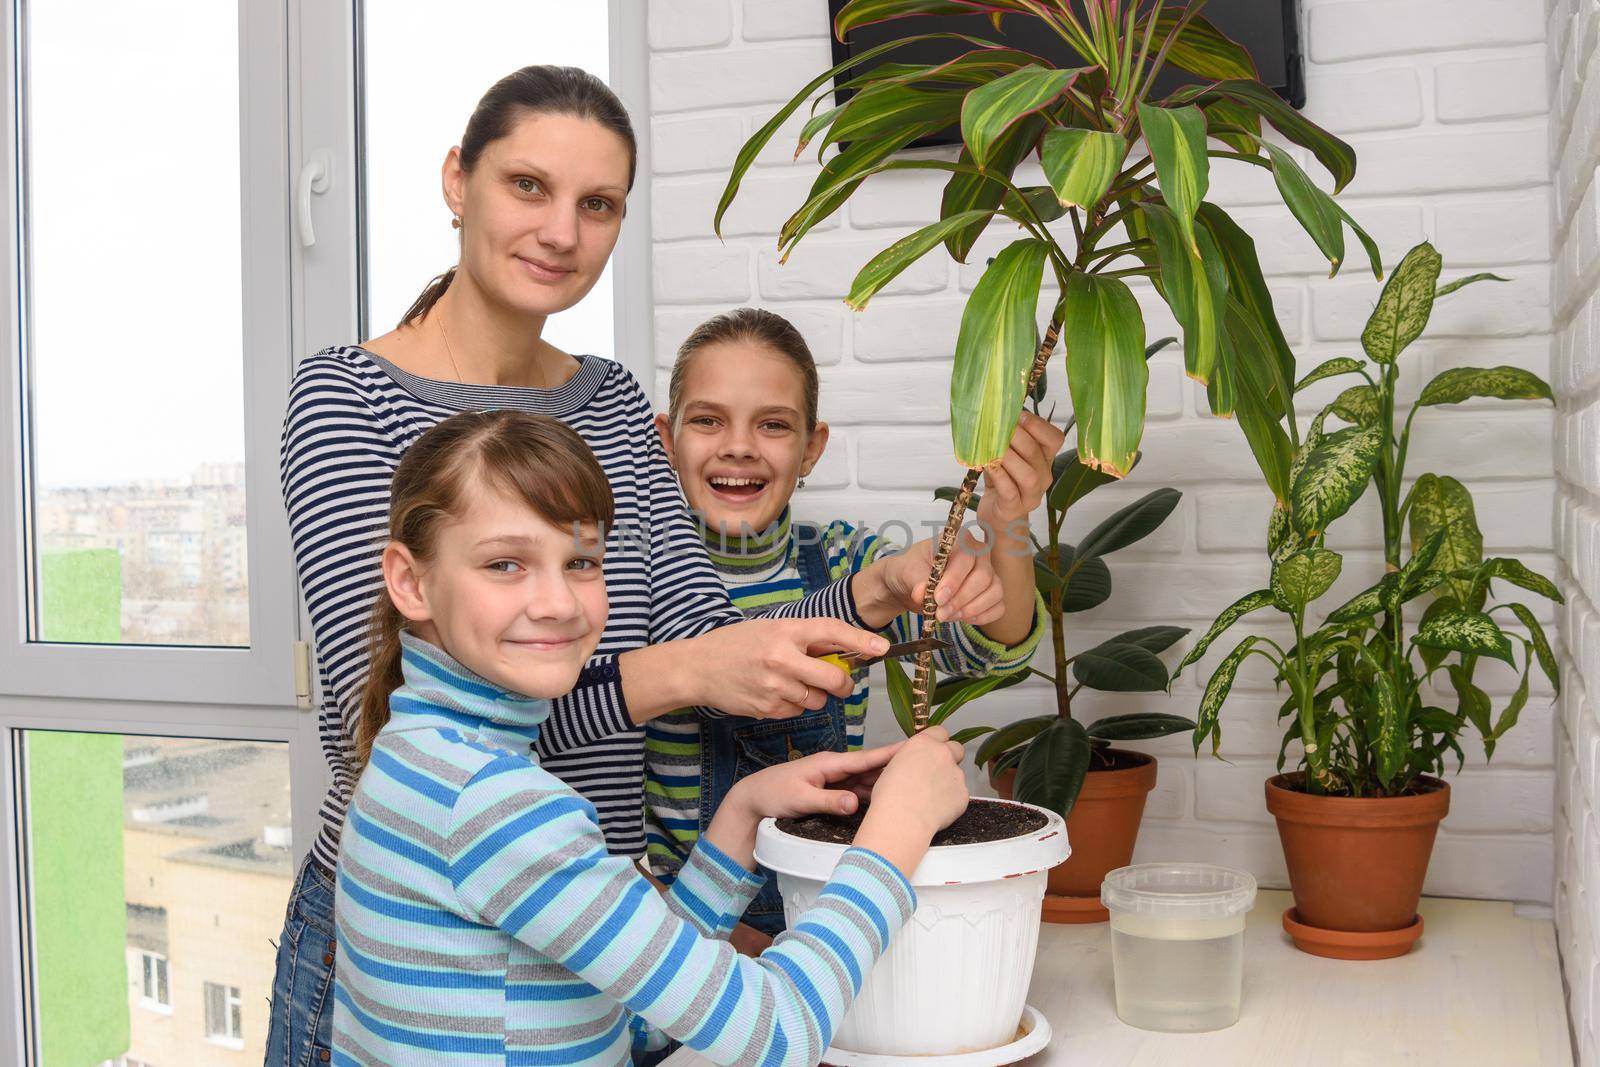 The family transplanted houseplants and joyfully looked into the frame.